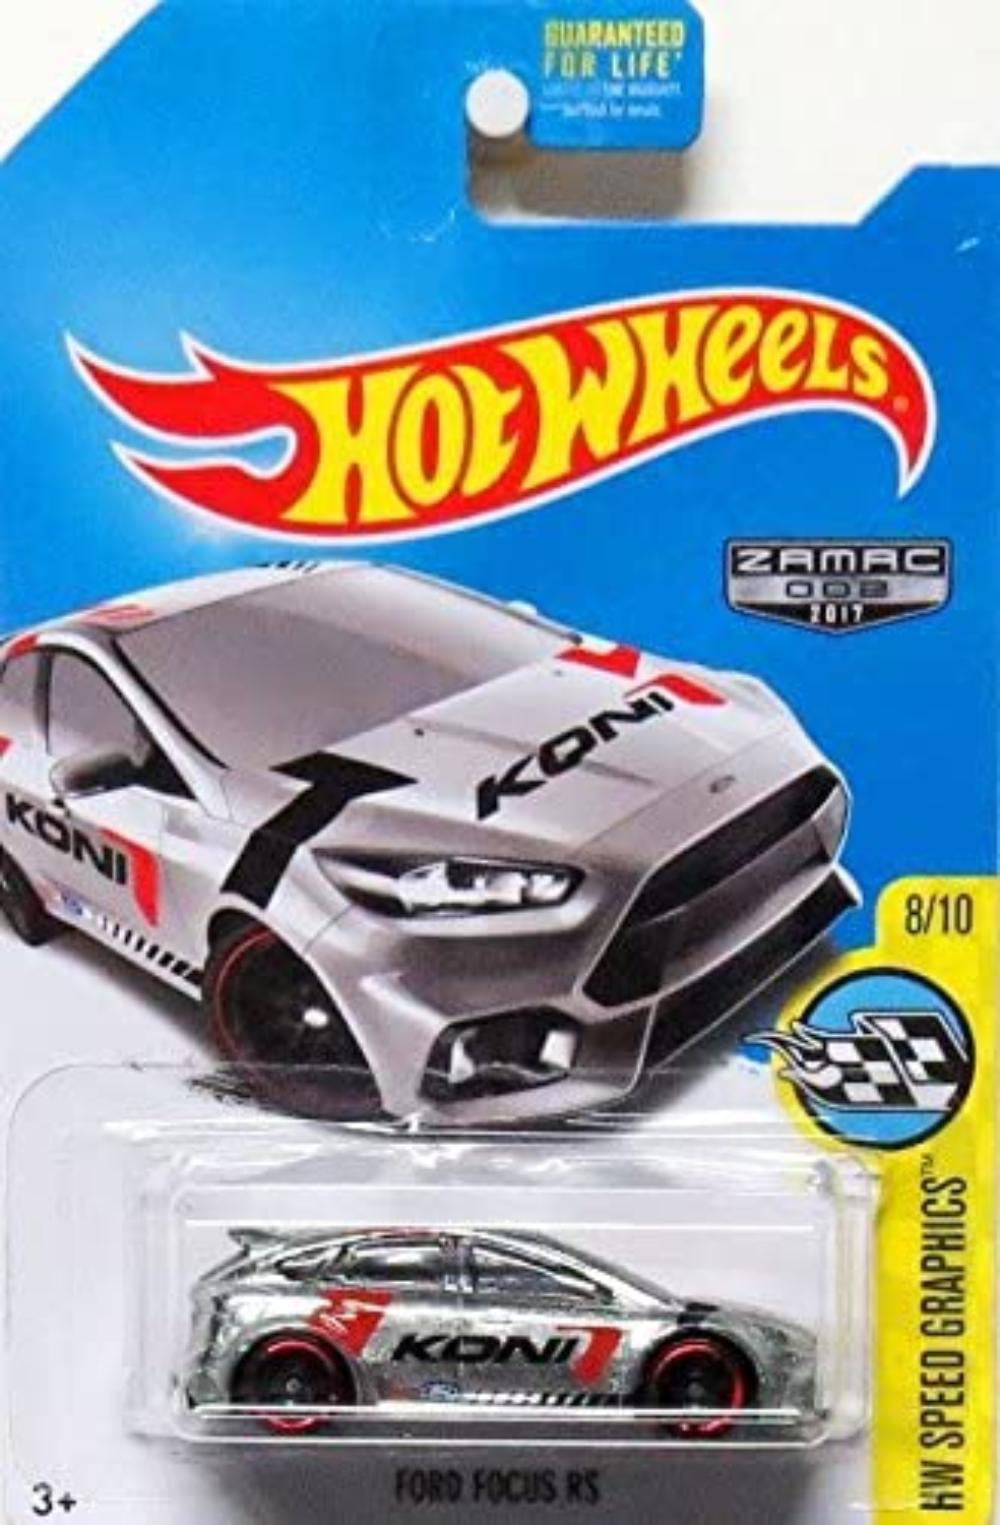 Two 2017 Hot Wheels FORD FOCUS RS Walmart Exclusive ZAMAC; red/black; KONI Speed 